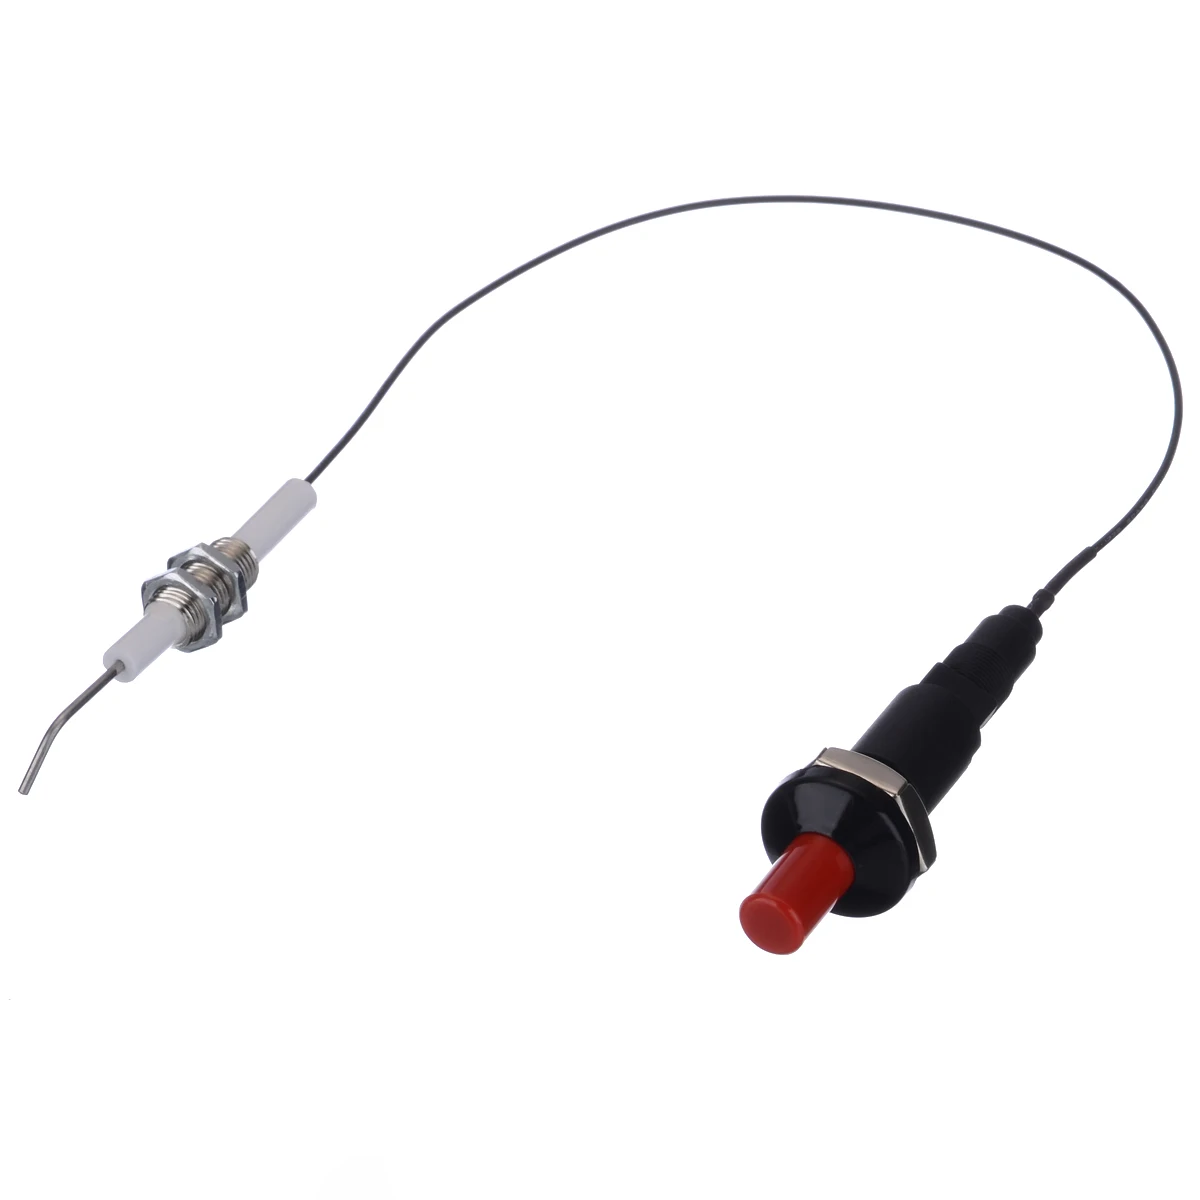 Universal Piezo Spark Ignition Set With 30cm Cable Push Button Igniter For  ︿ φ 